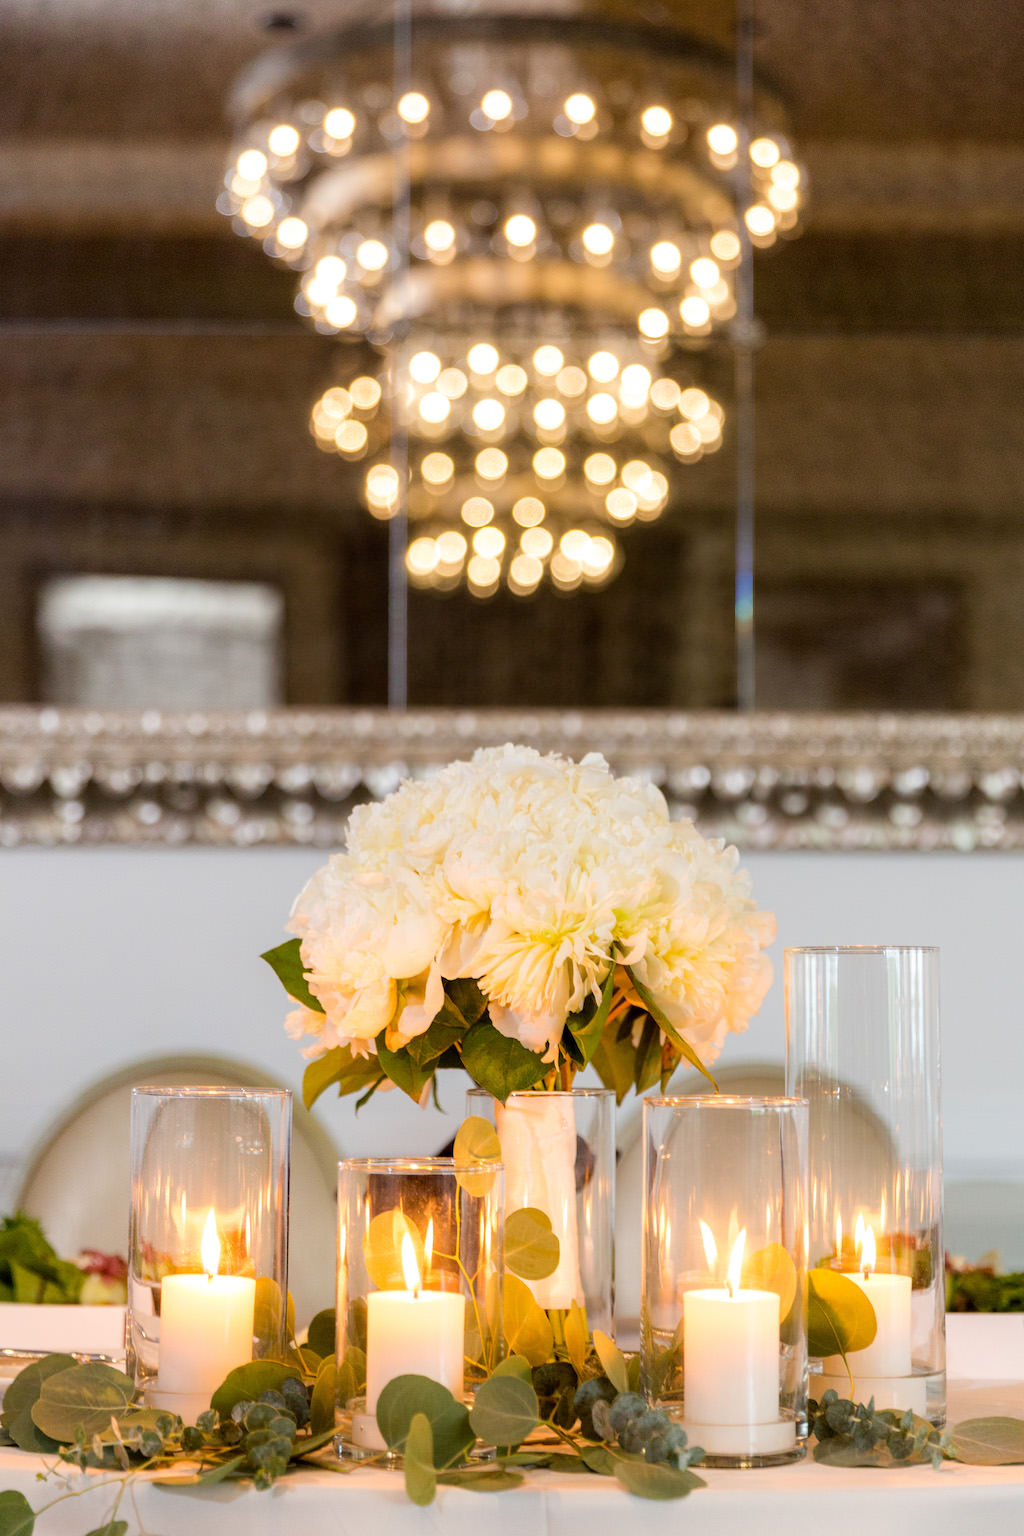 Vintage Hotel Ballroom Wedding Reception Sweetheart Table with White Peony with Greenery Centerpiece and Votive Candles | Tampa Bay Wedding Venue The Birchwood | Florist Cotton and Magnolia